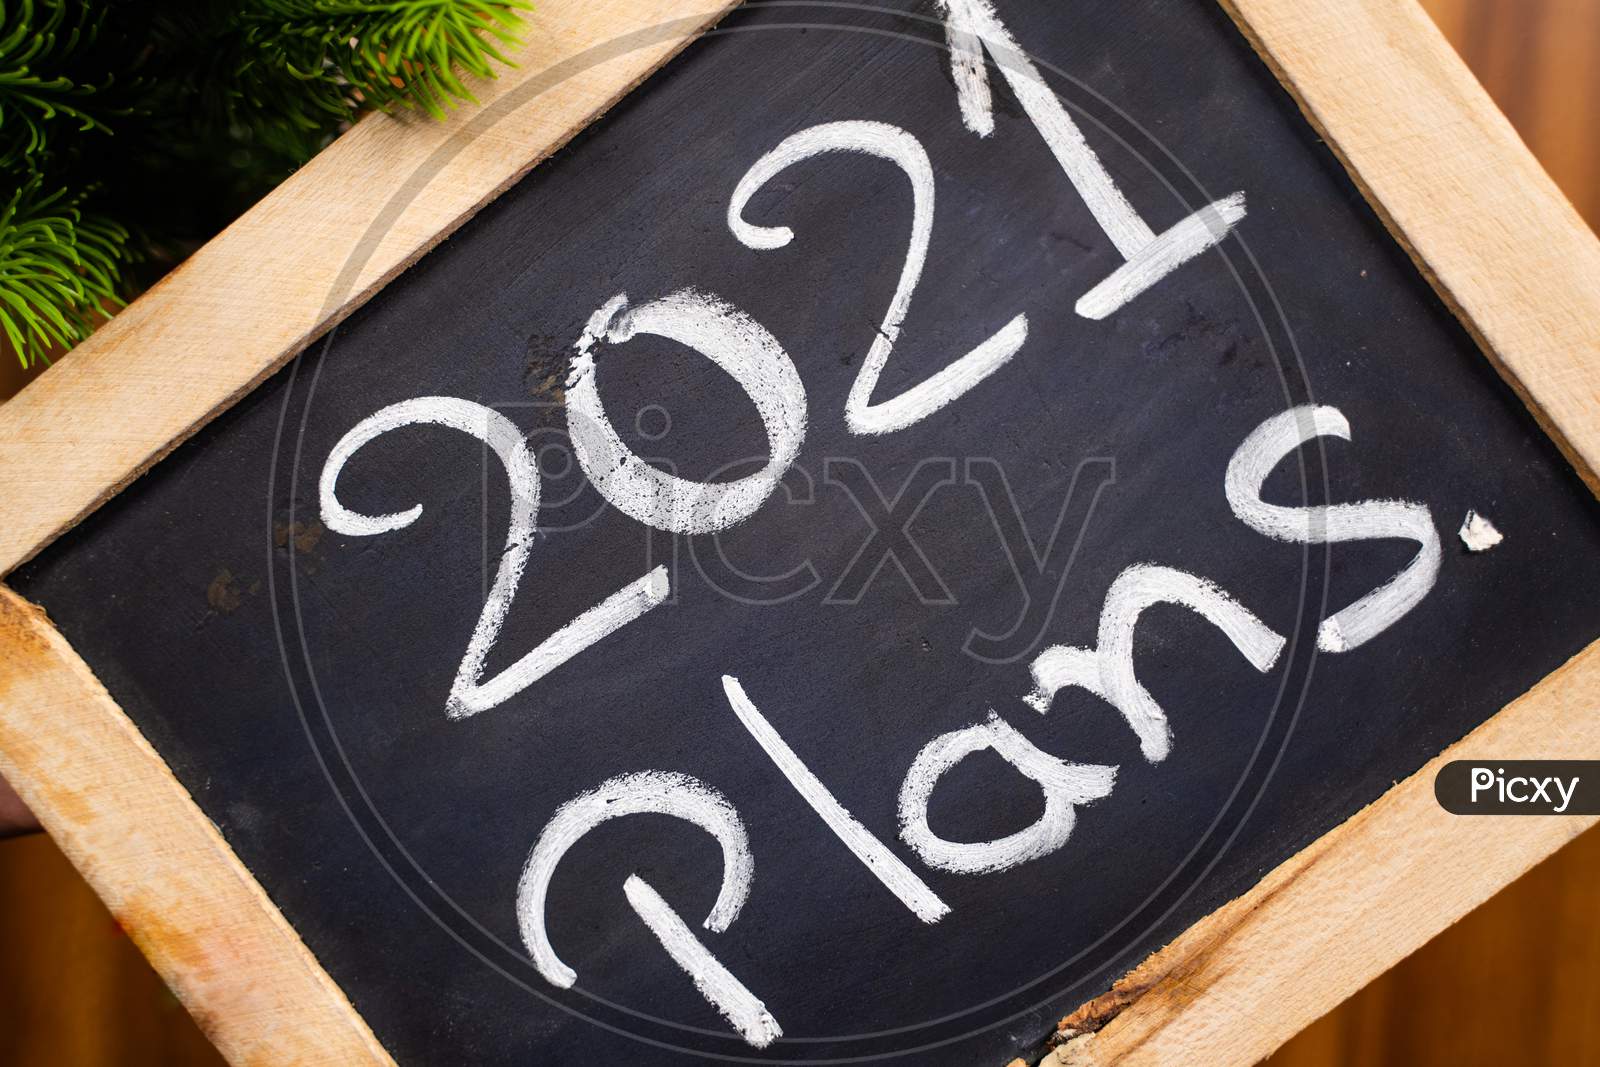 Hand Written 2021 Plans On School Slate - Concept Of New Year 2021 Planning.